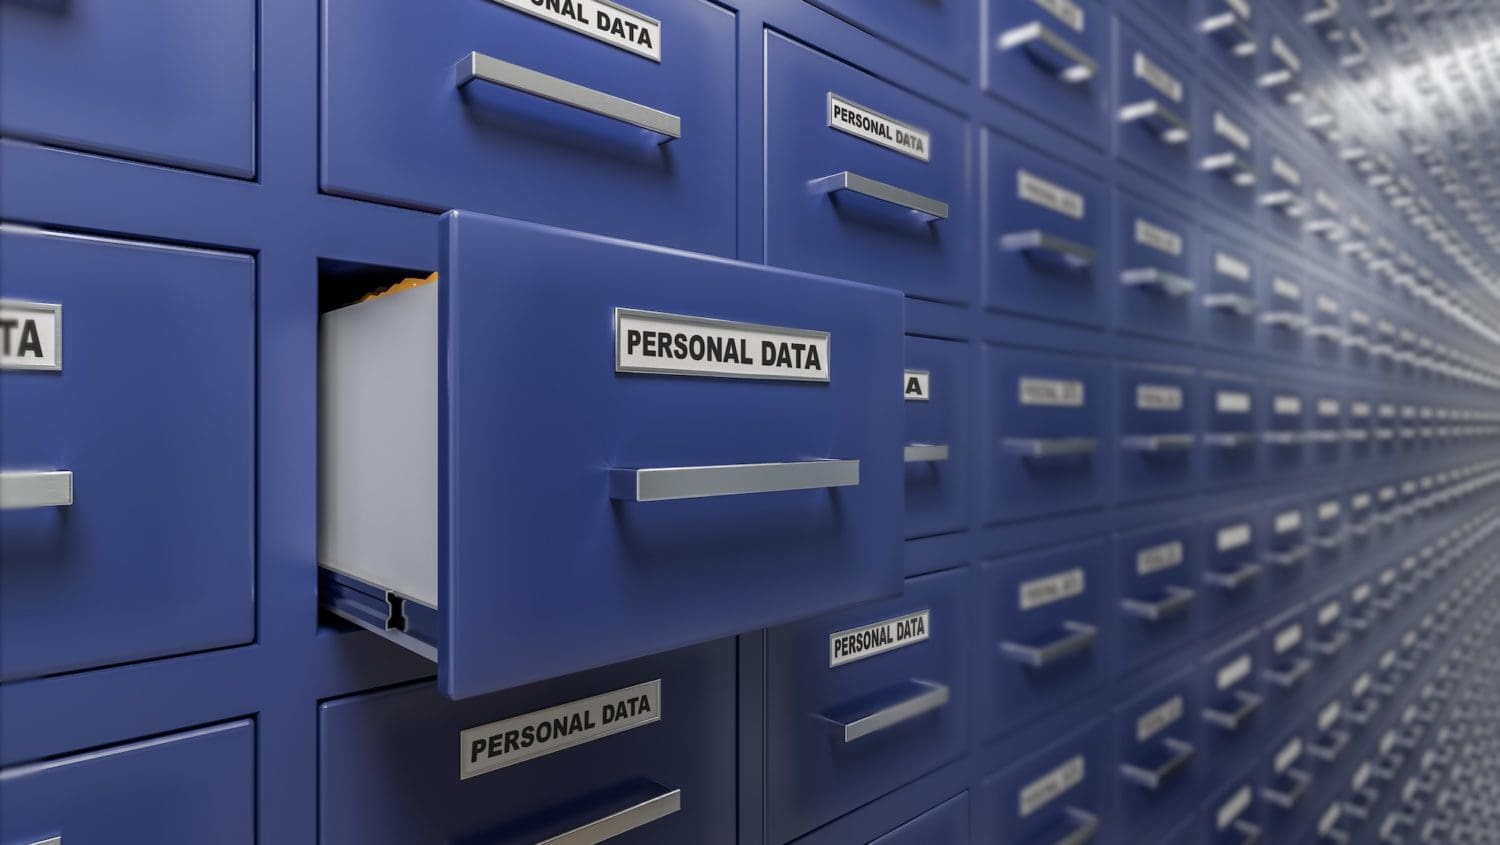 A close-up view of open blue filing cabinets labeled "personal data" in a vast, neatly arranged archival room, illustrating data storage and management.